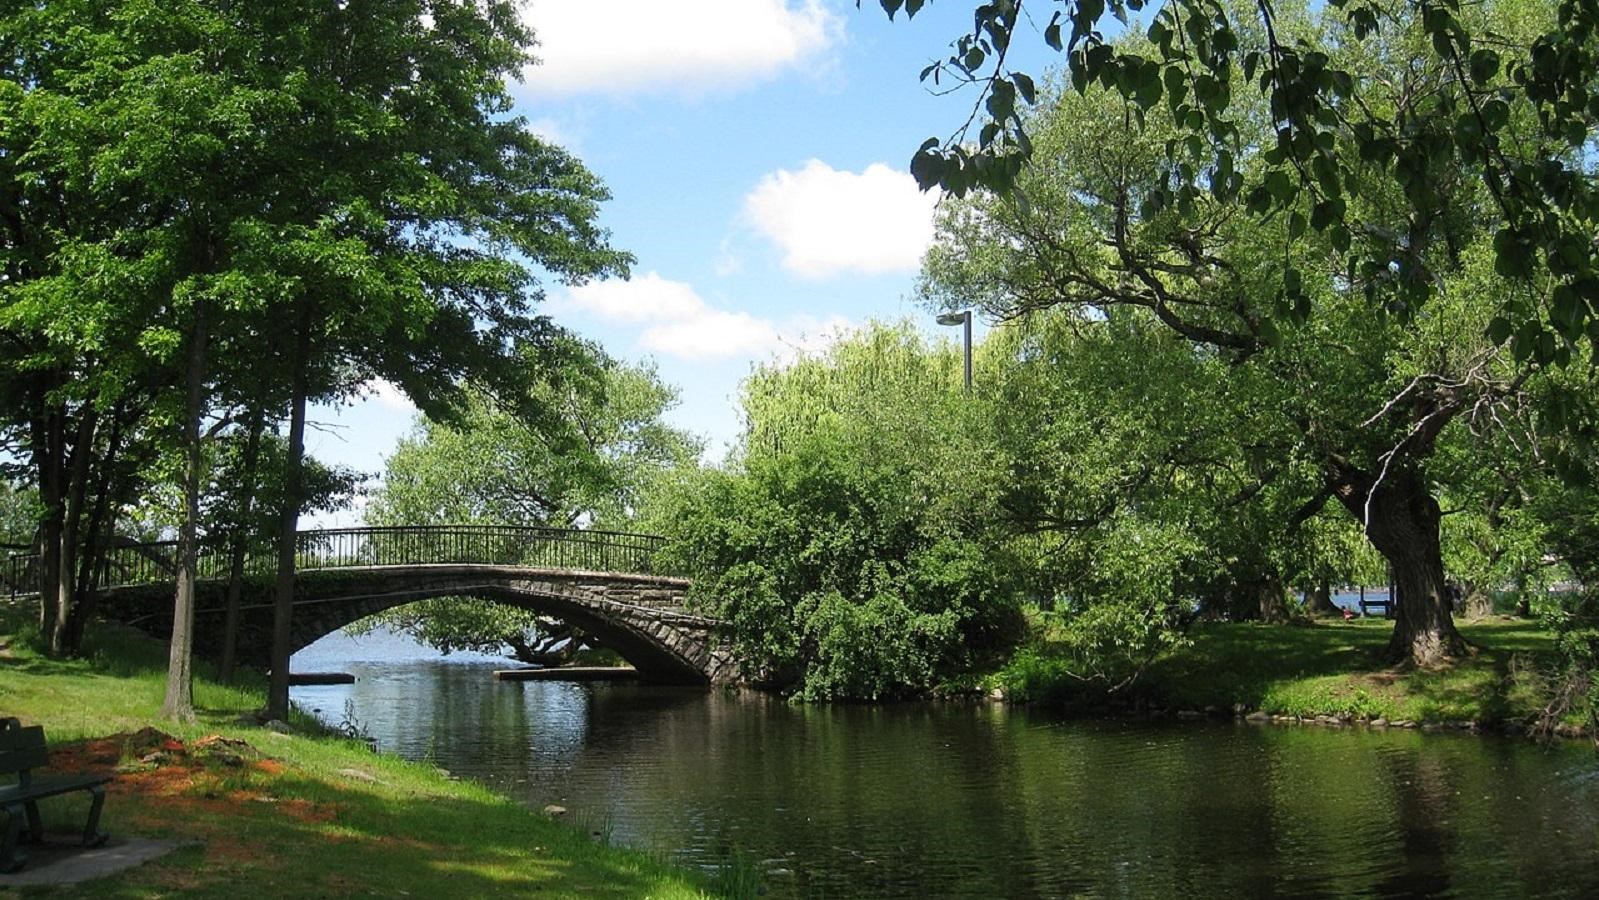 Bridge over waterway surrounded by greenery. 